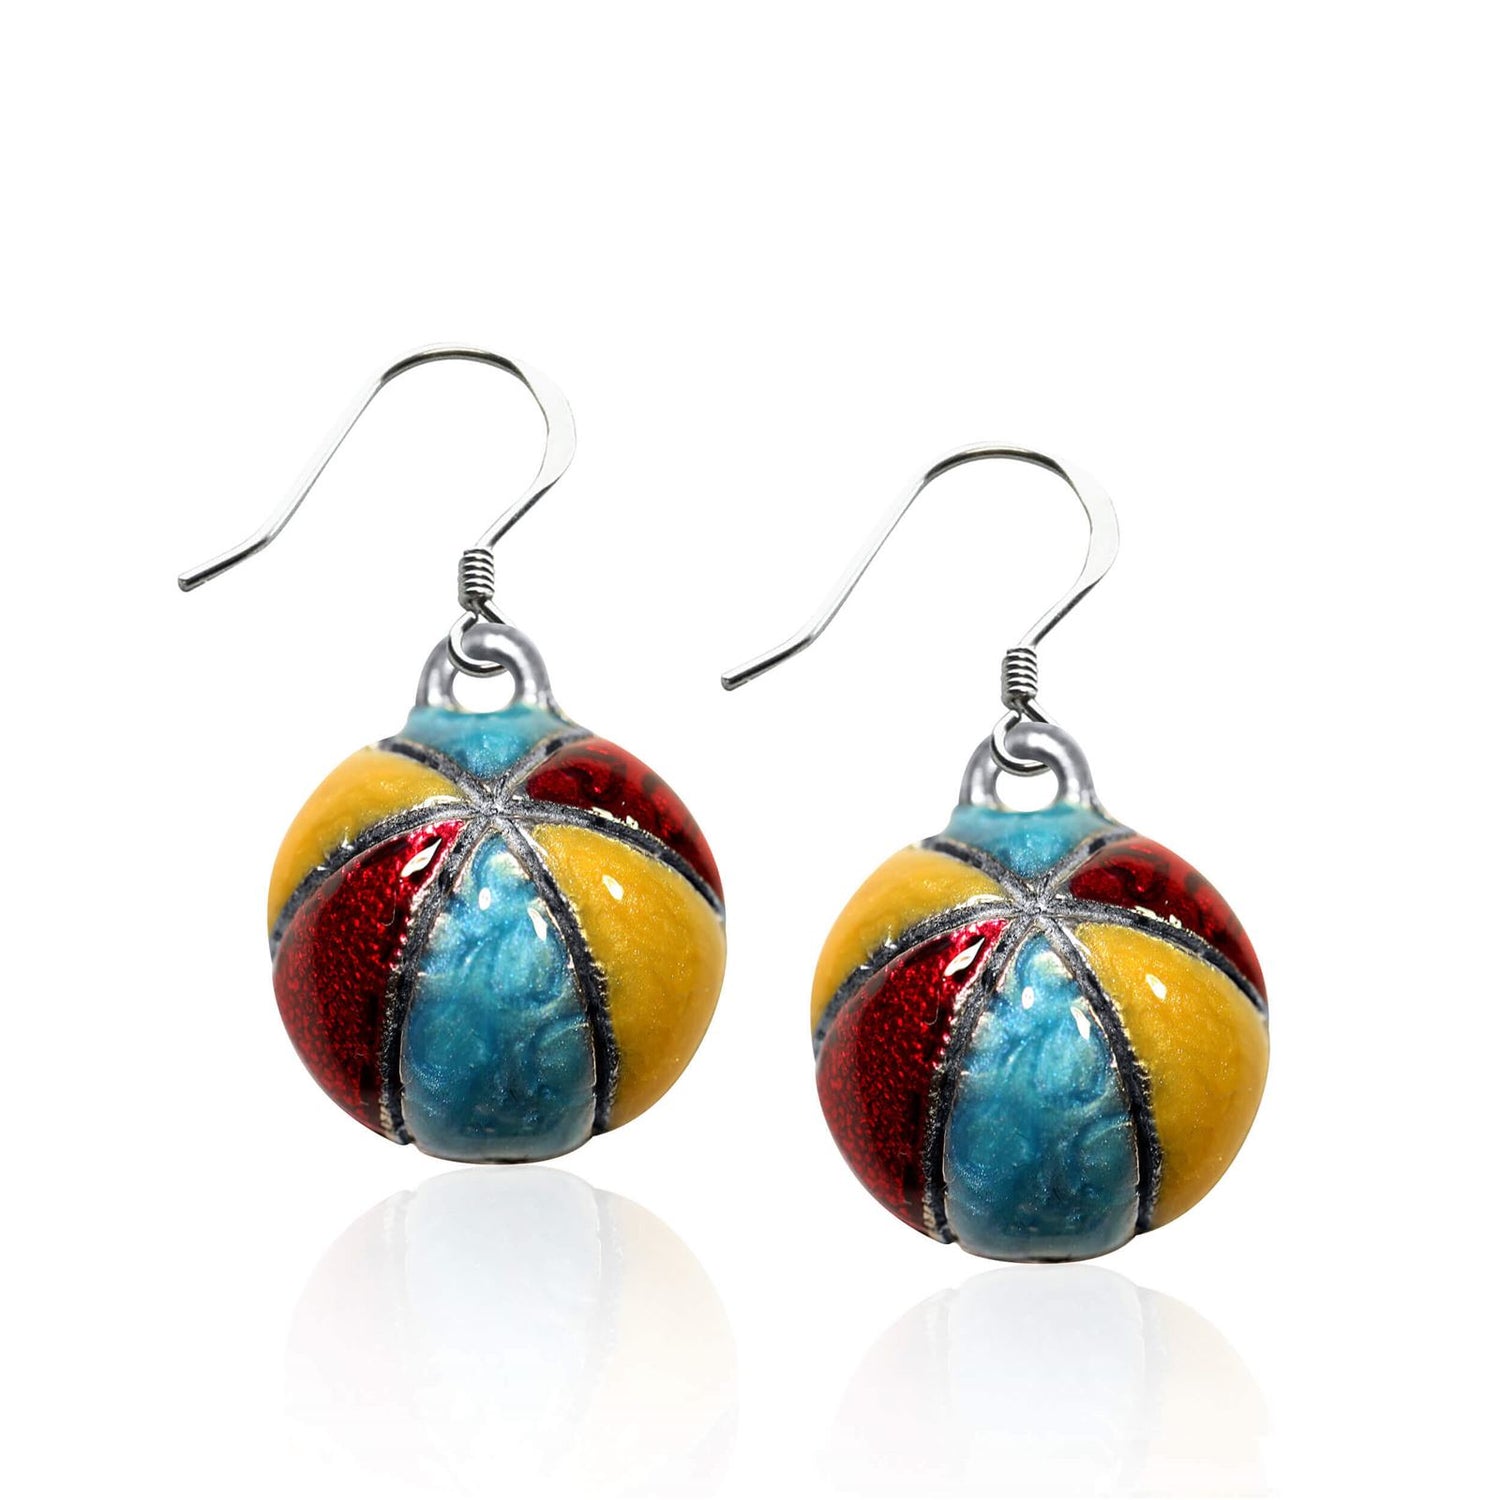 Whimsical Gifts | Beach Ball Charm Earrings in Silver Finish | Holiday & Seasonal Themed | Spring & Summer Fun | Jewelry